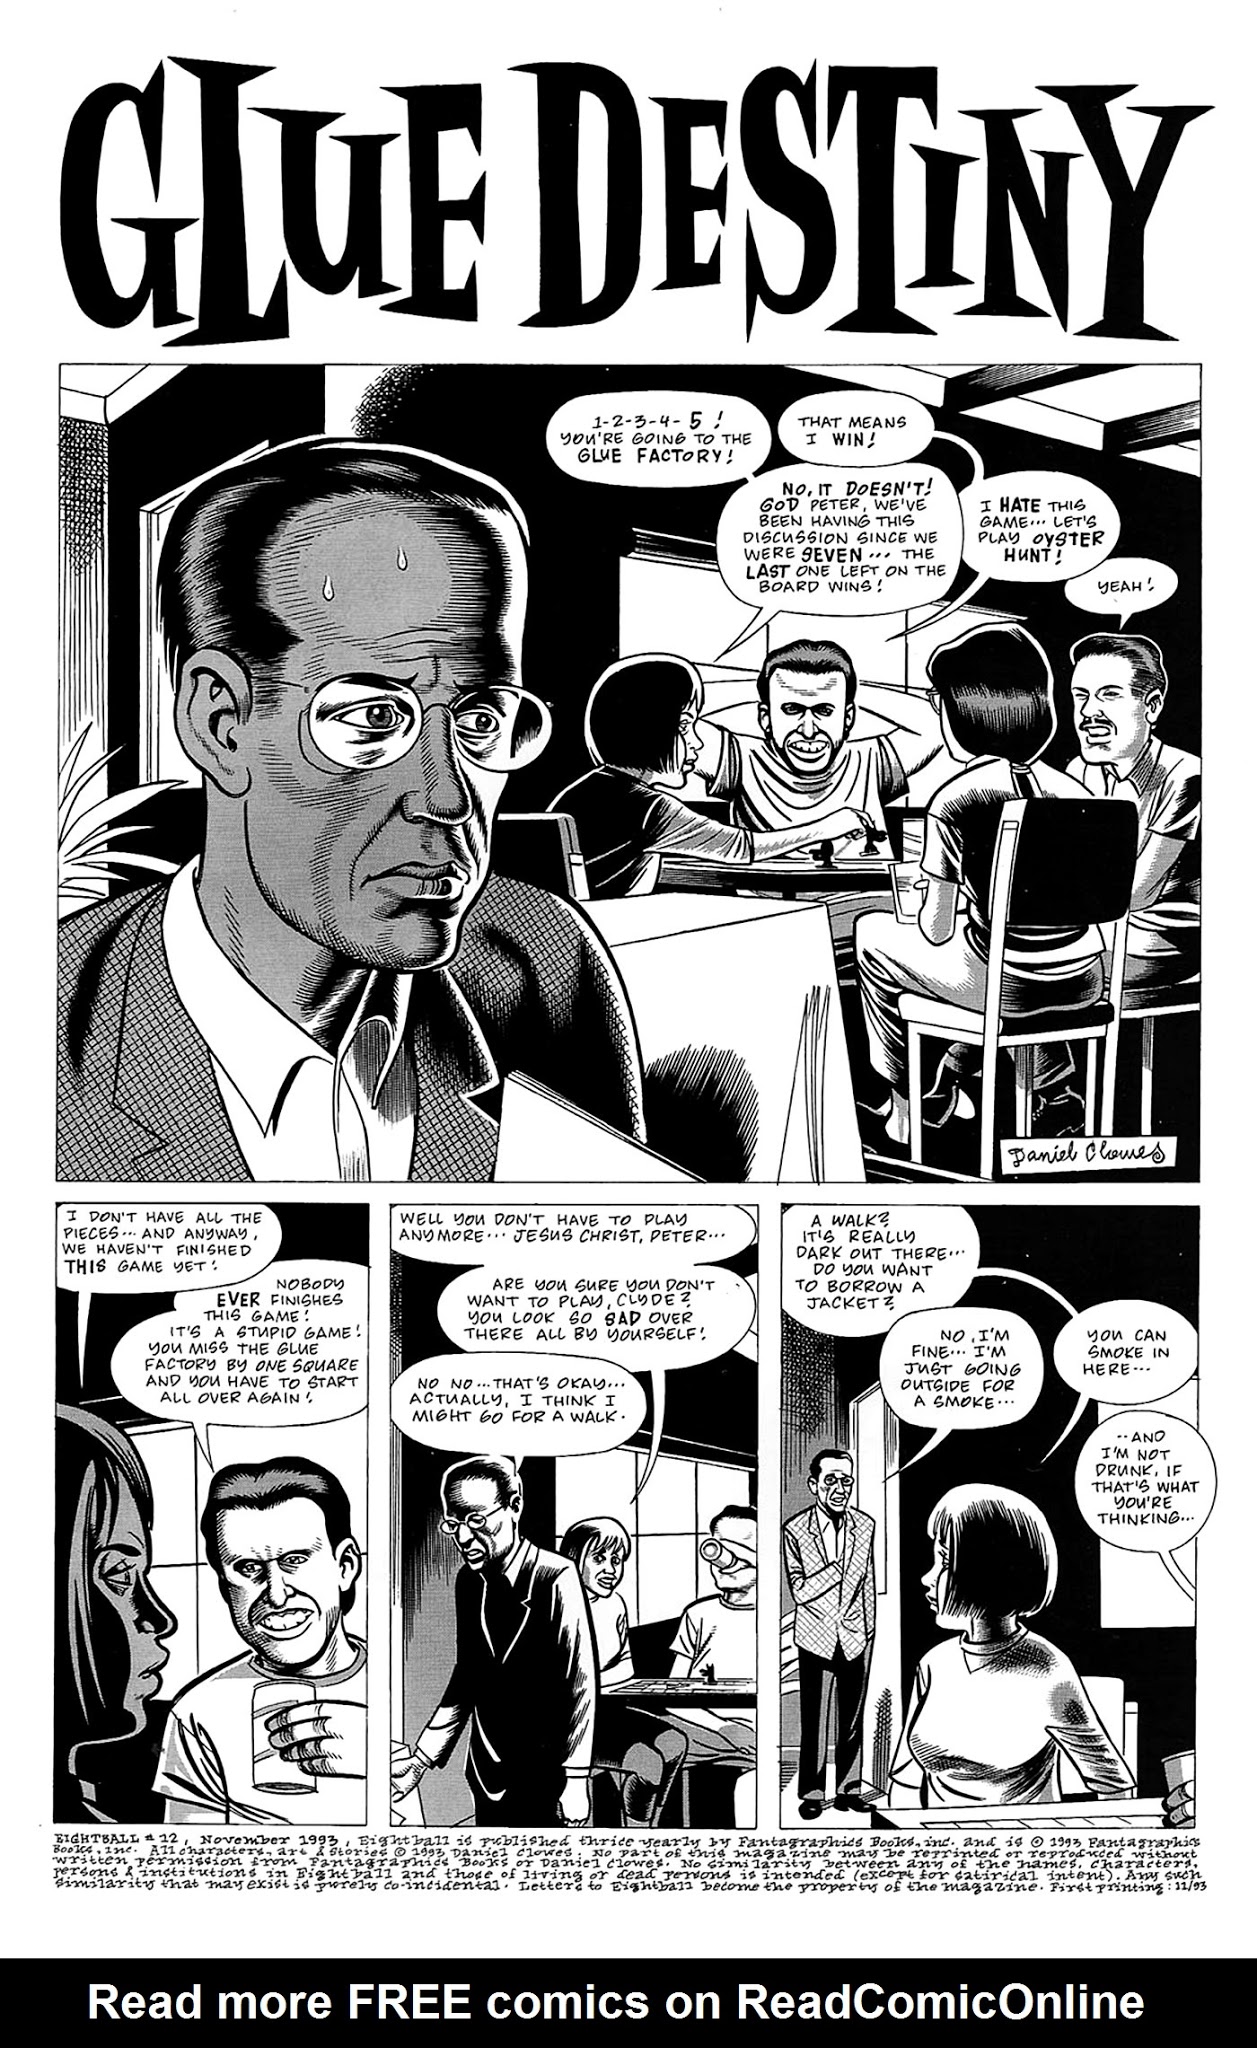 Read online Eightball comic -  Issue #12 - 2